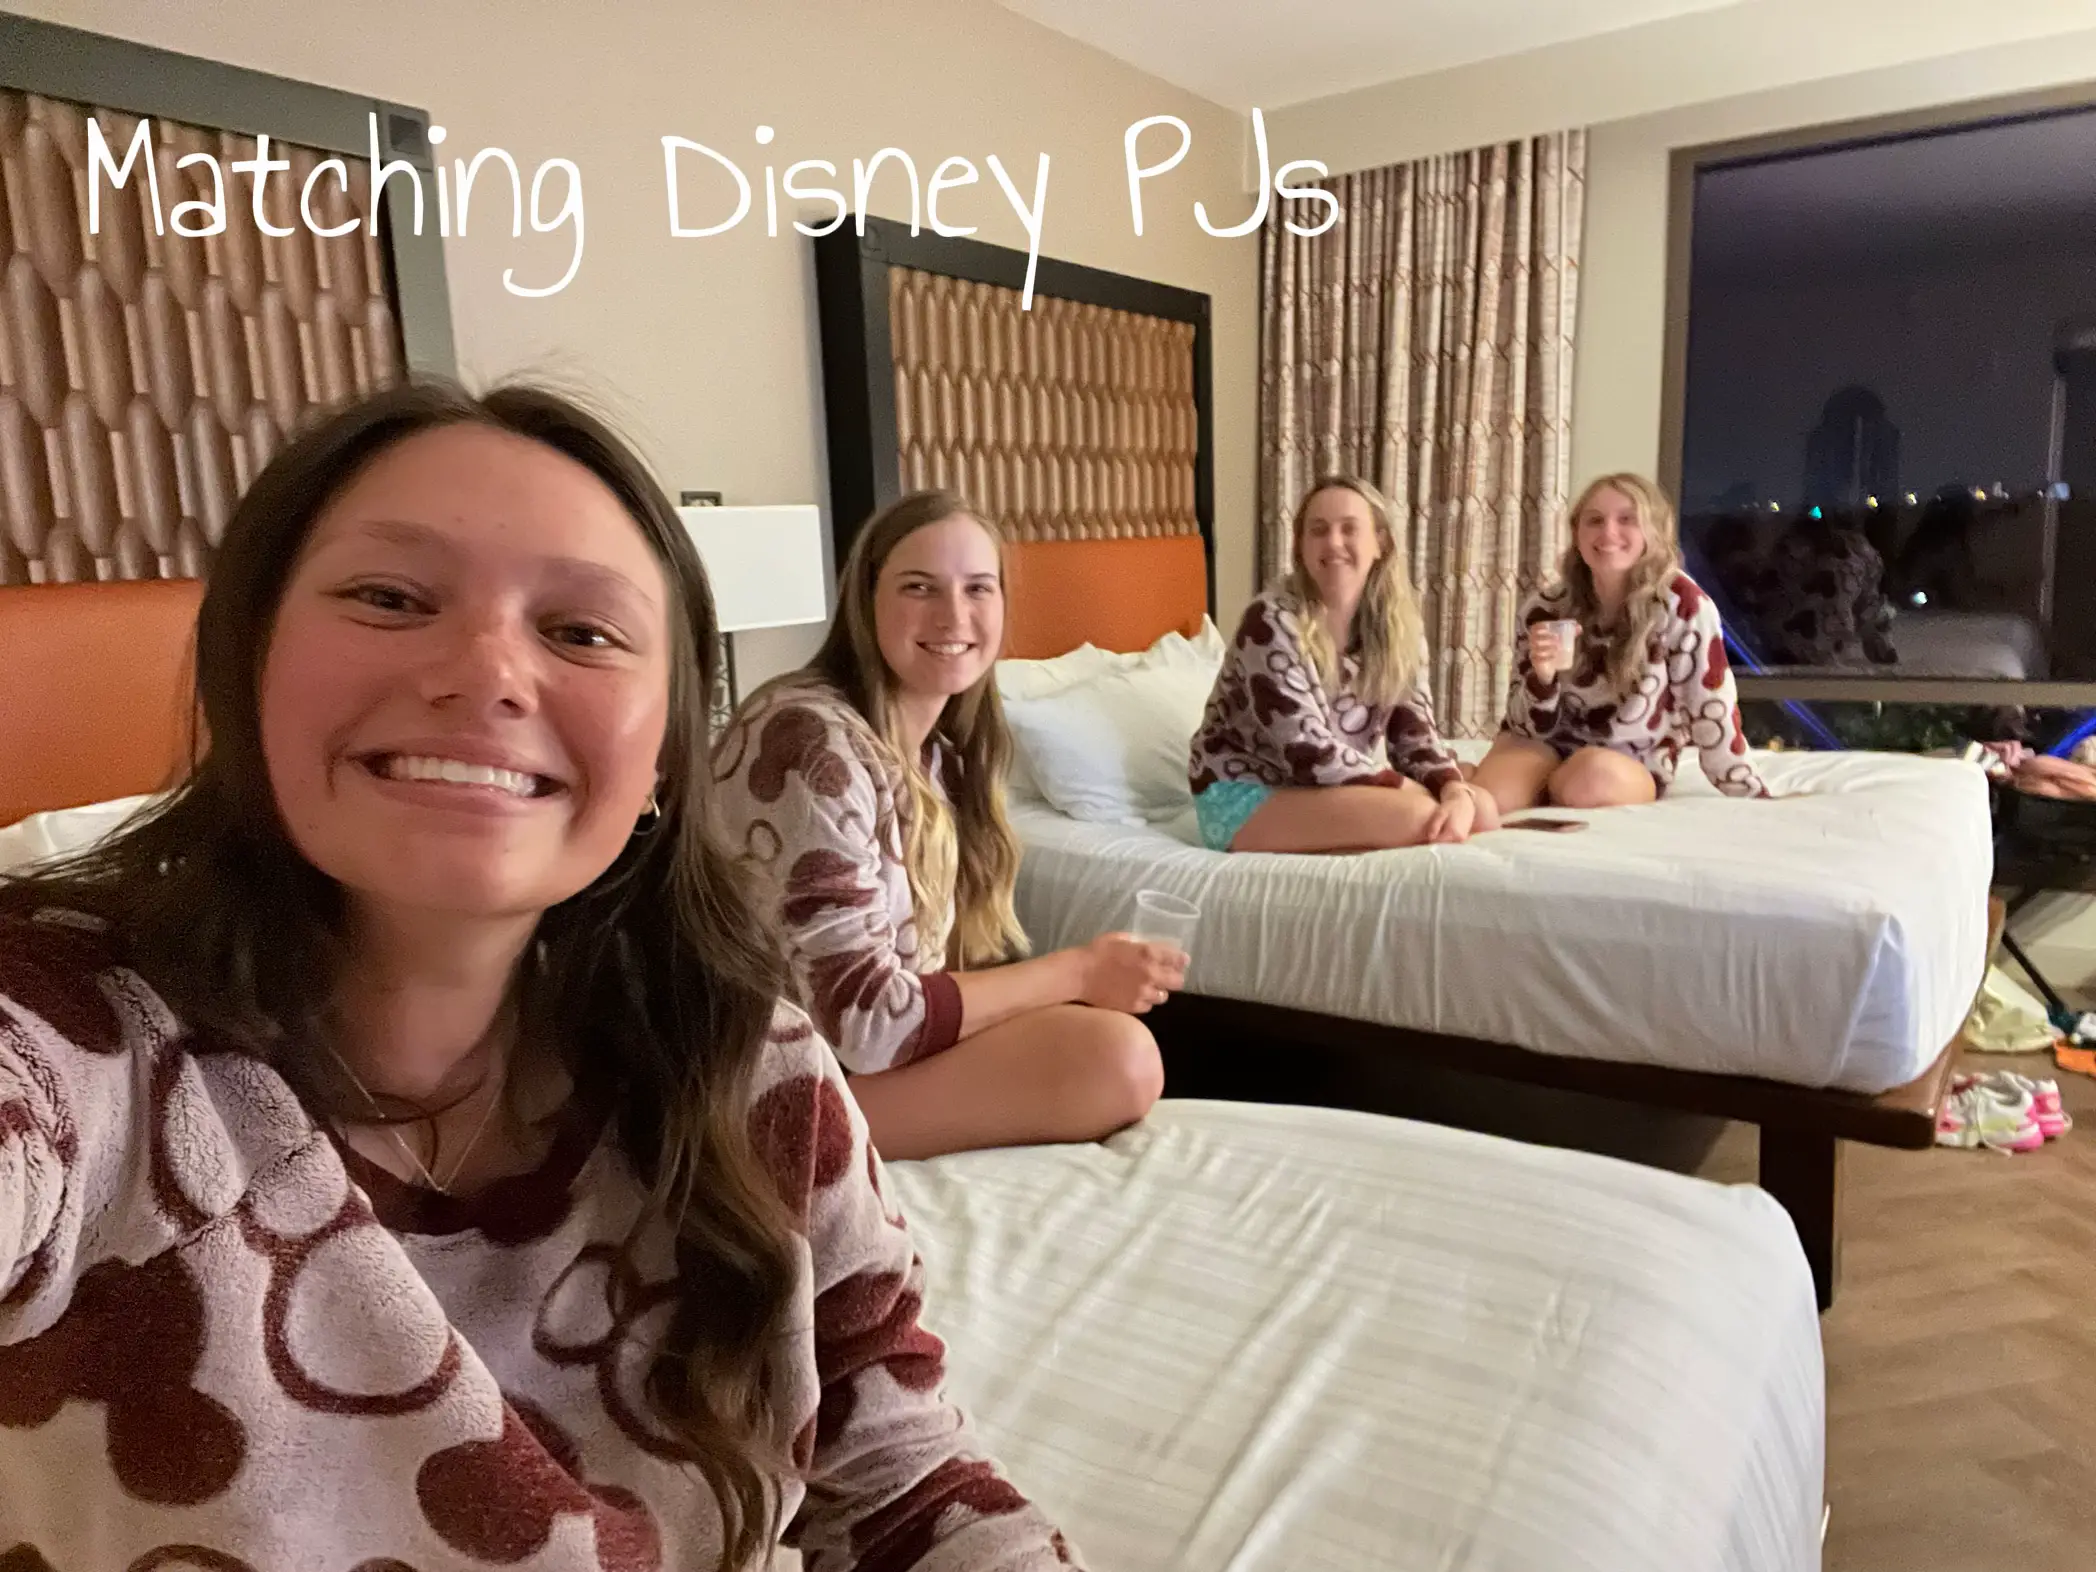  Three women are sitting on a bed wearing matching Disney PJs.